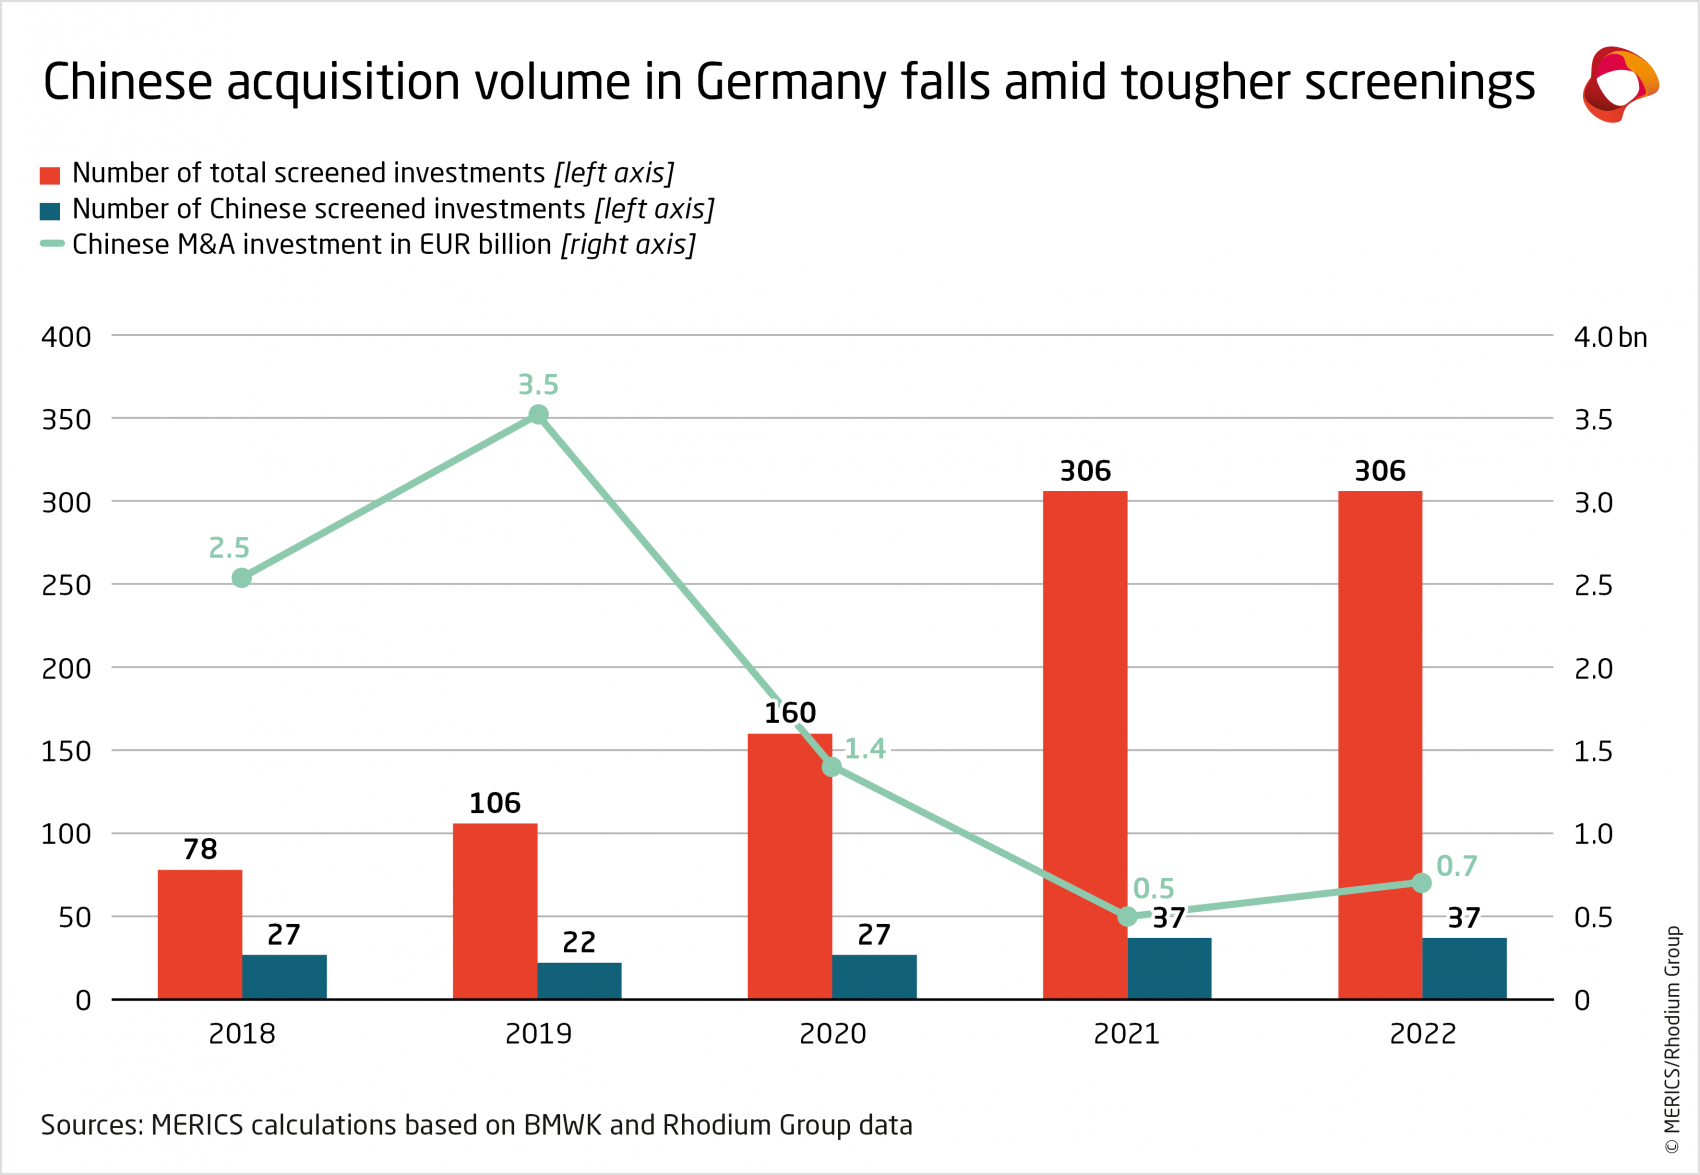 merics-chinese-fdi-in-europe-2022-acquisition-volume-in-Germay-falls.png